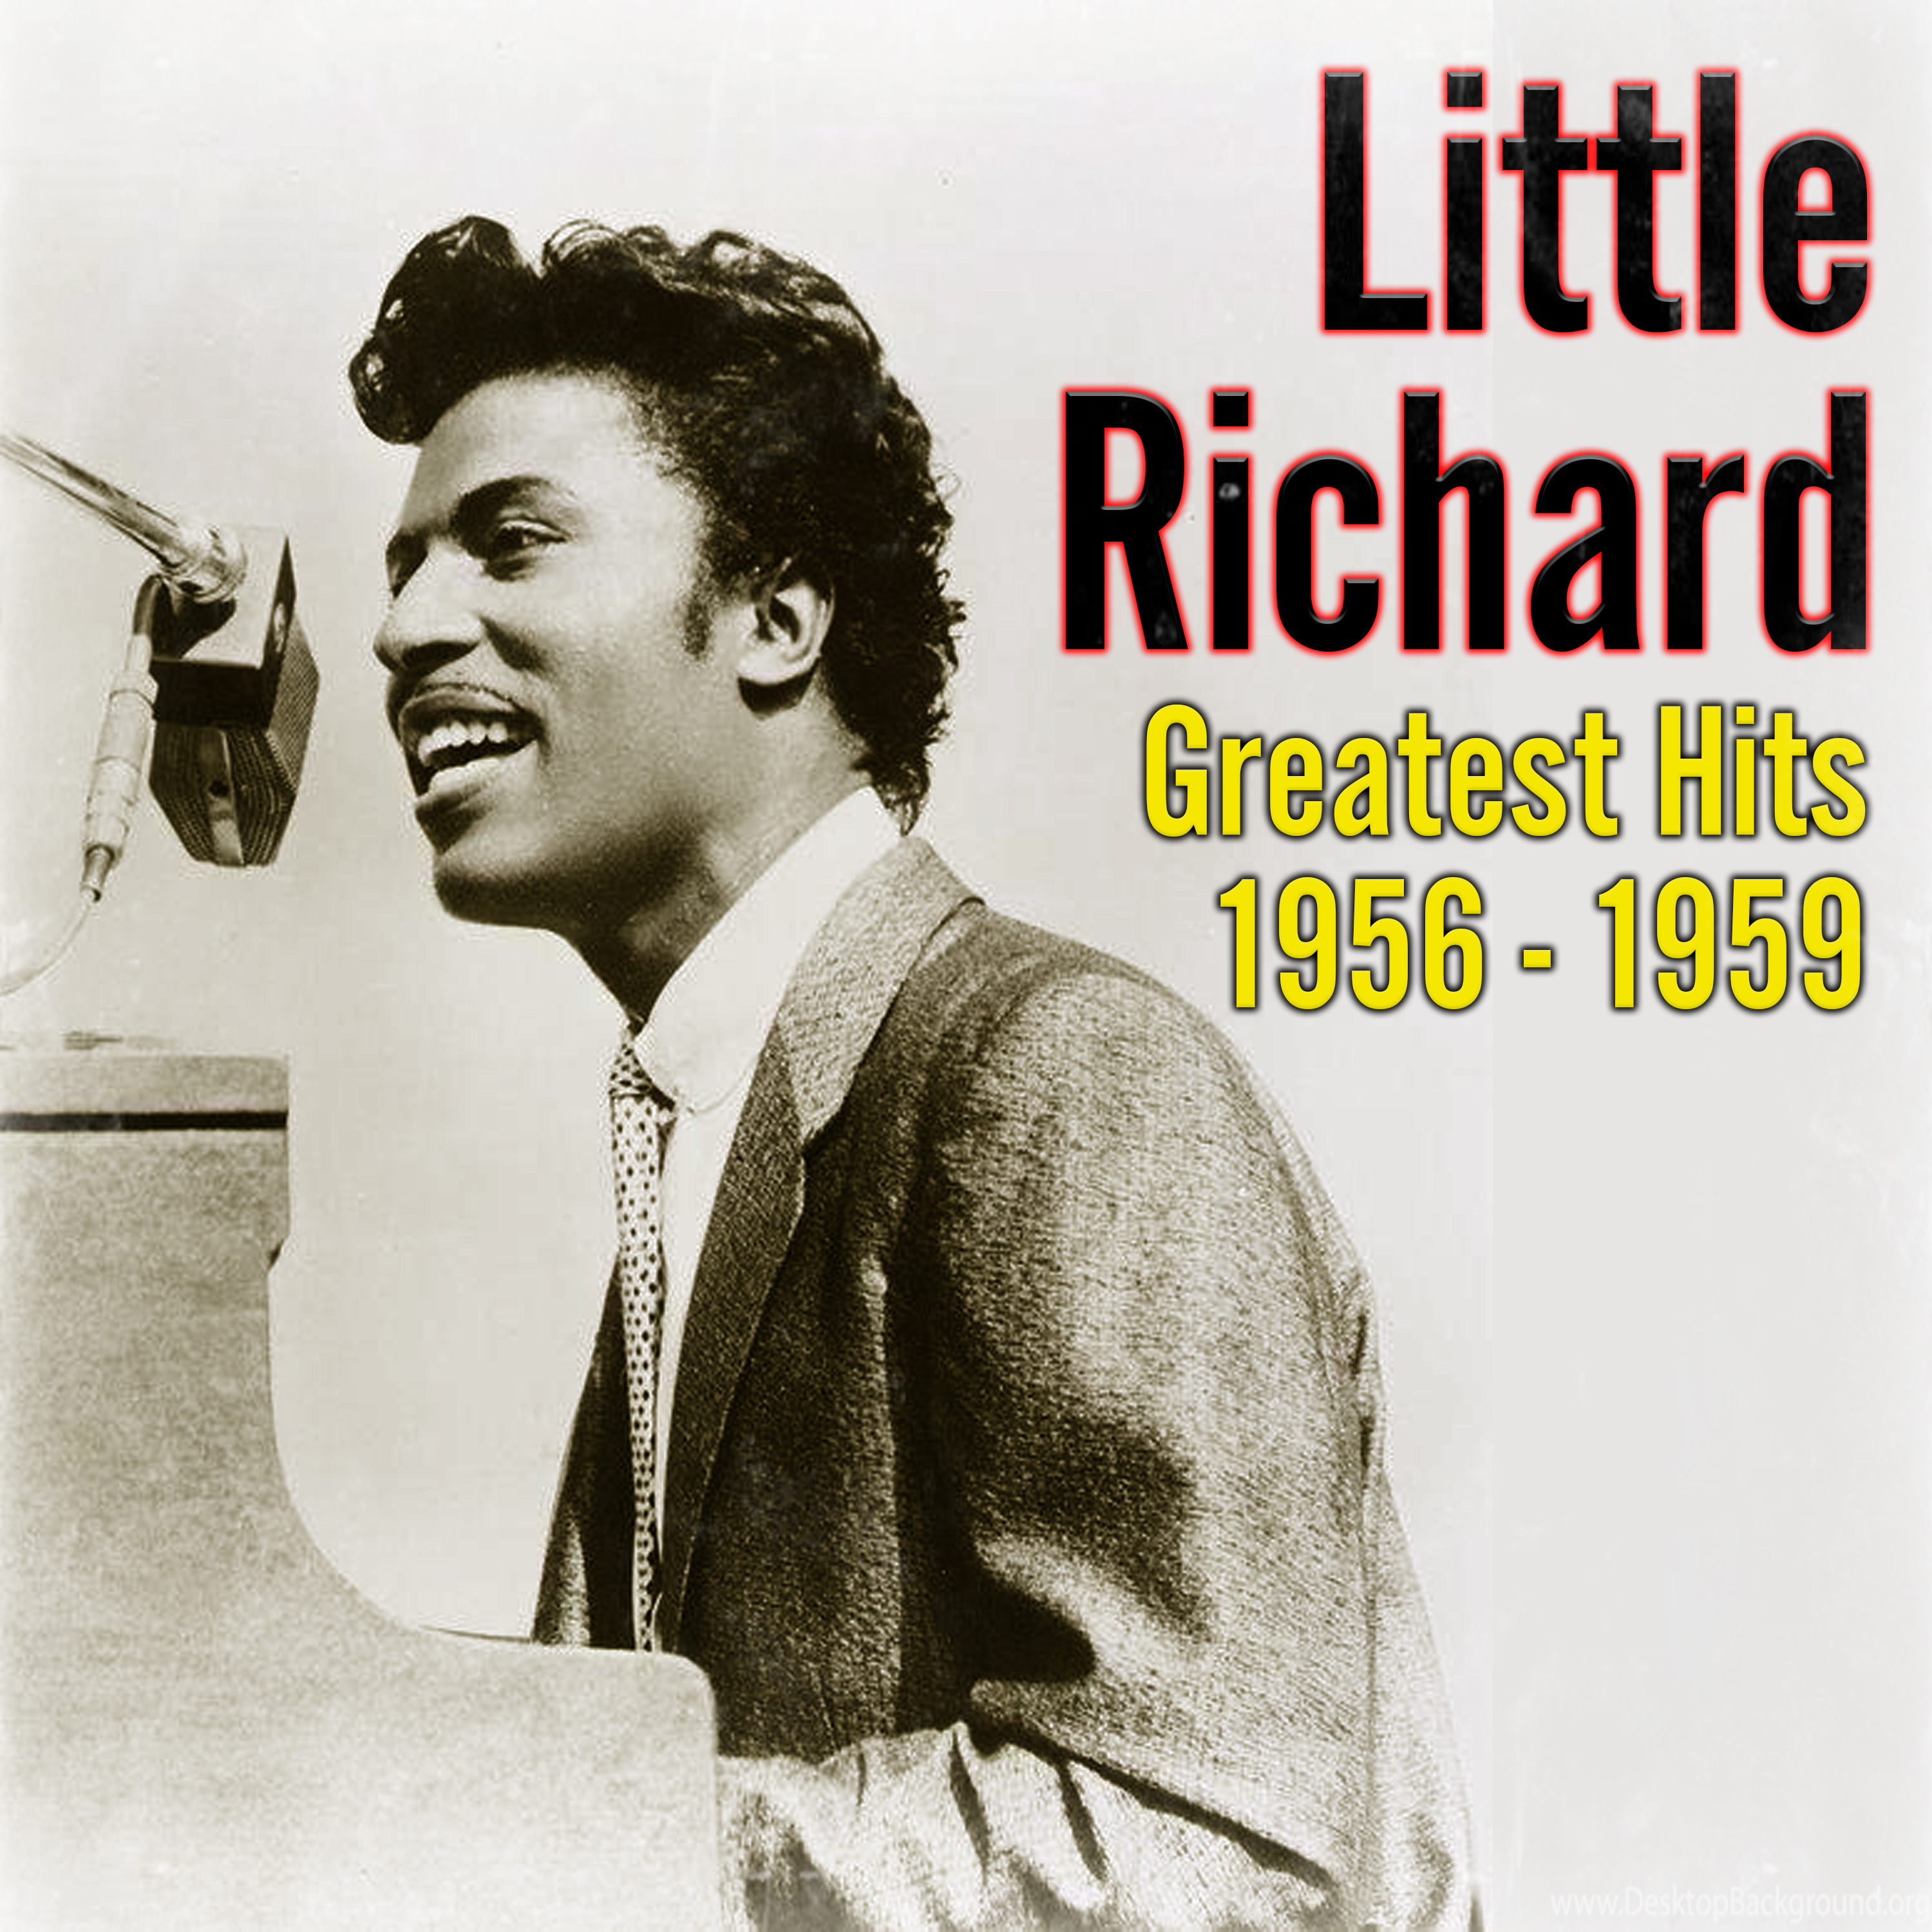 Greatest Hits 1956 - 1959